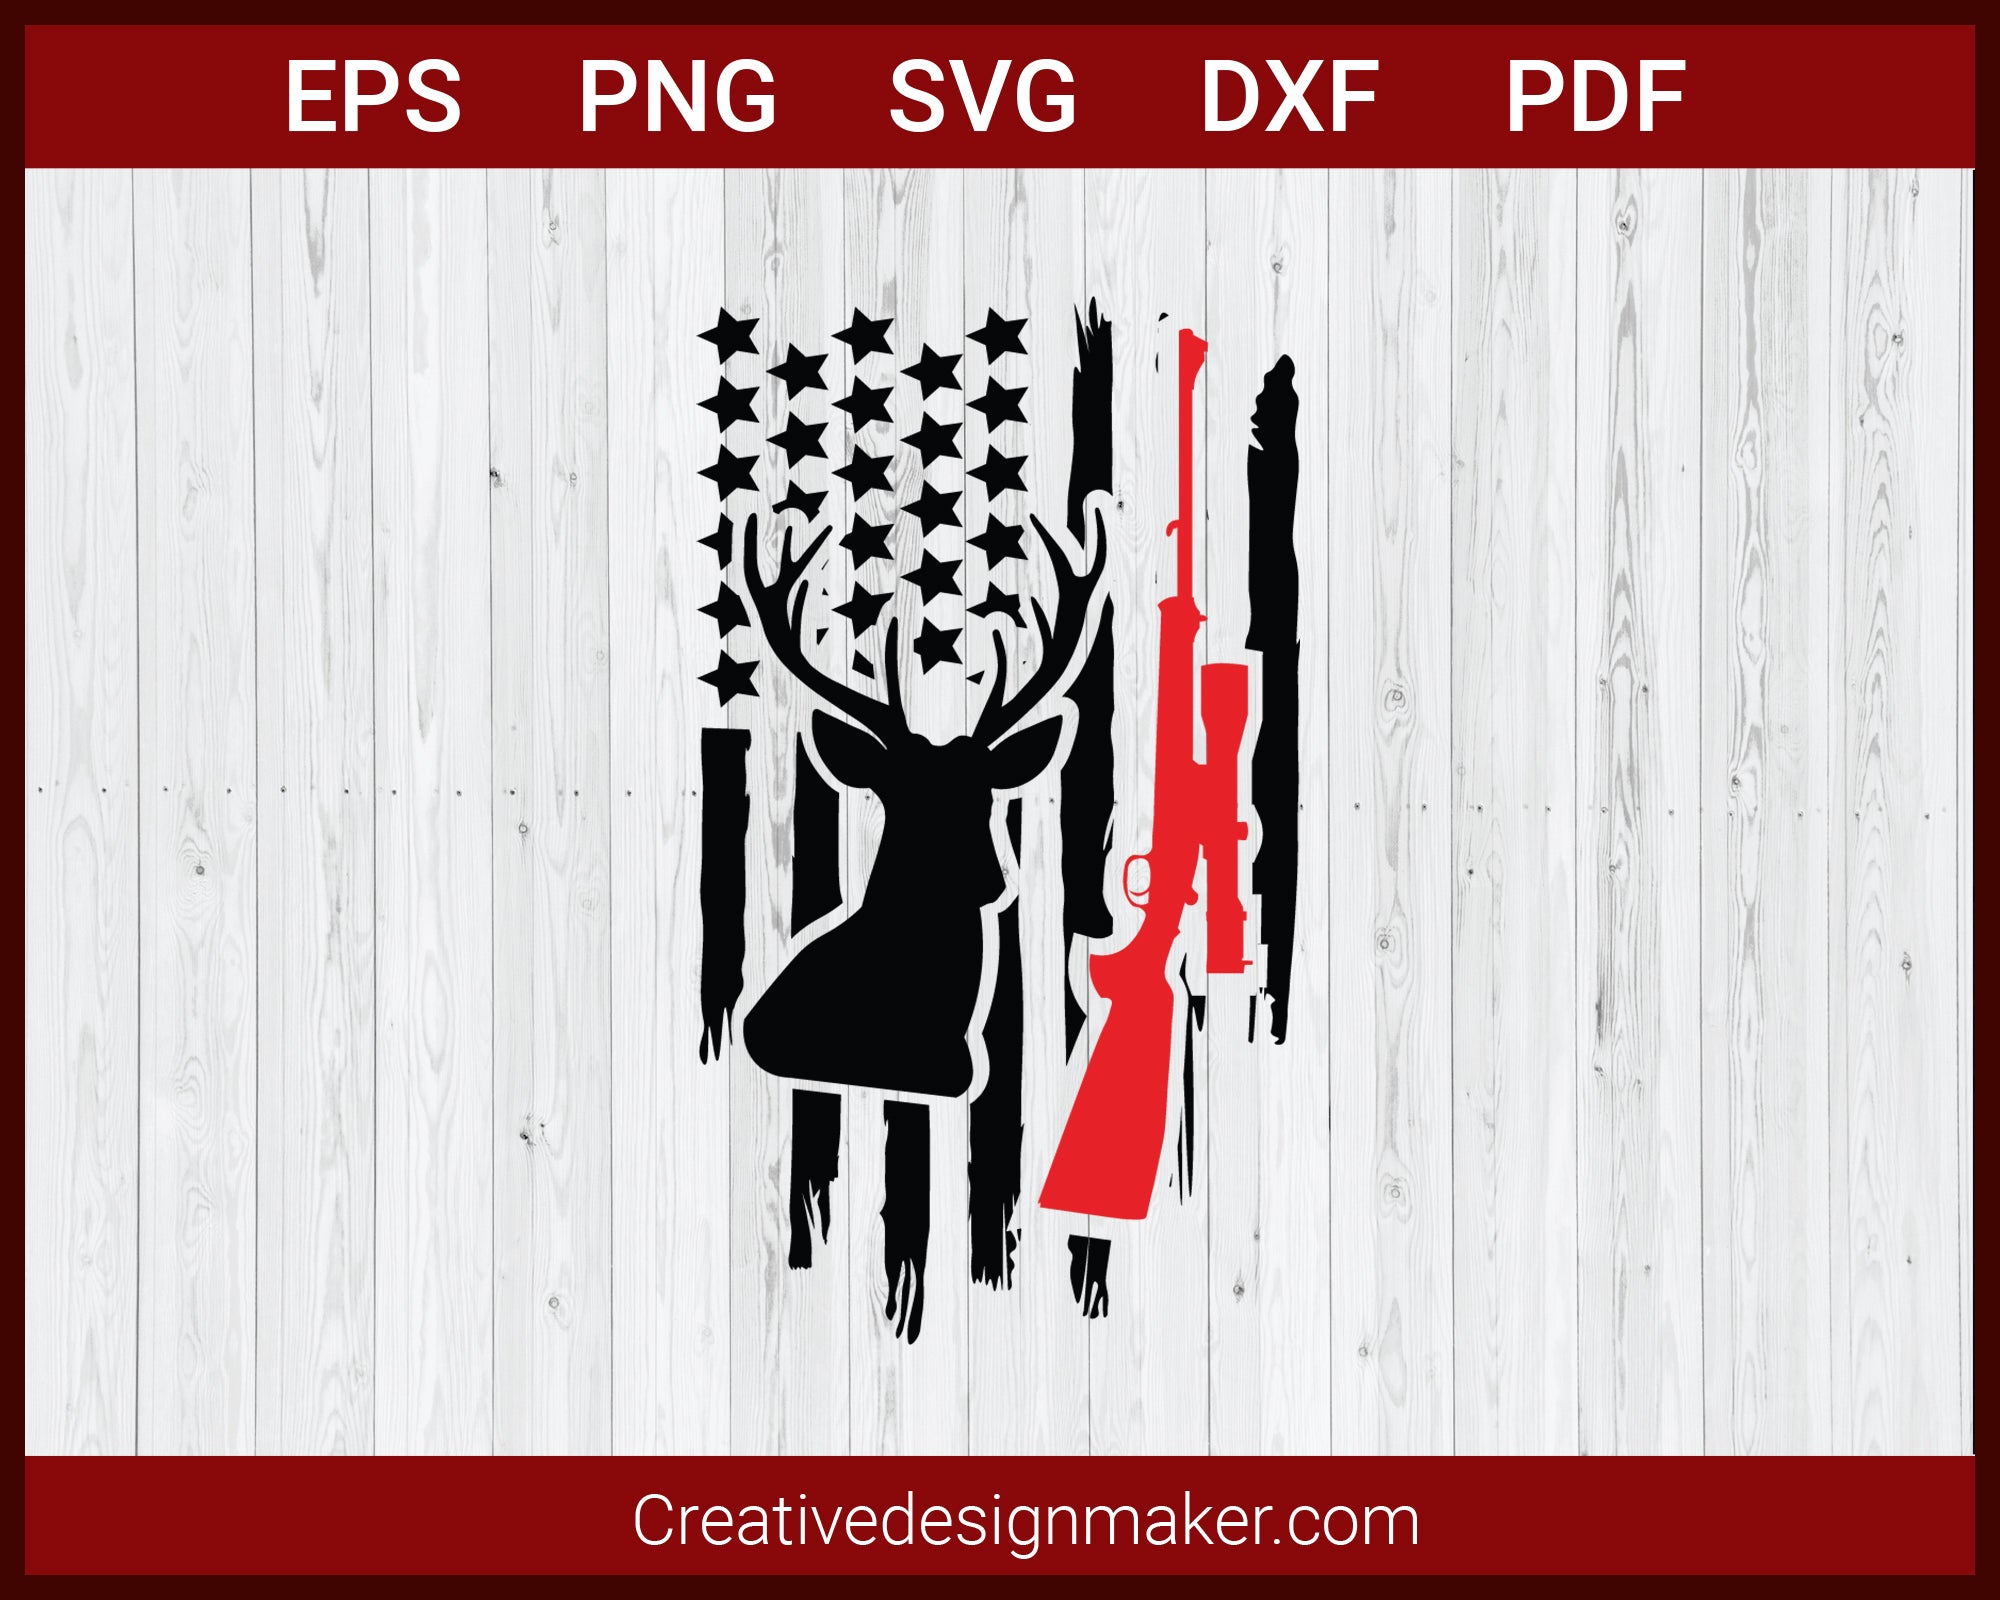 Deer Hunting American Flag SVG Cricut Silhouette DXF PNG EPS Cut File